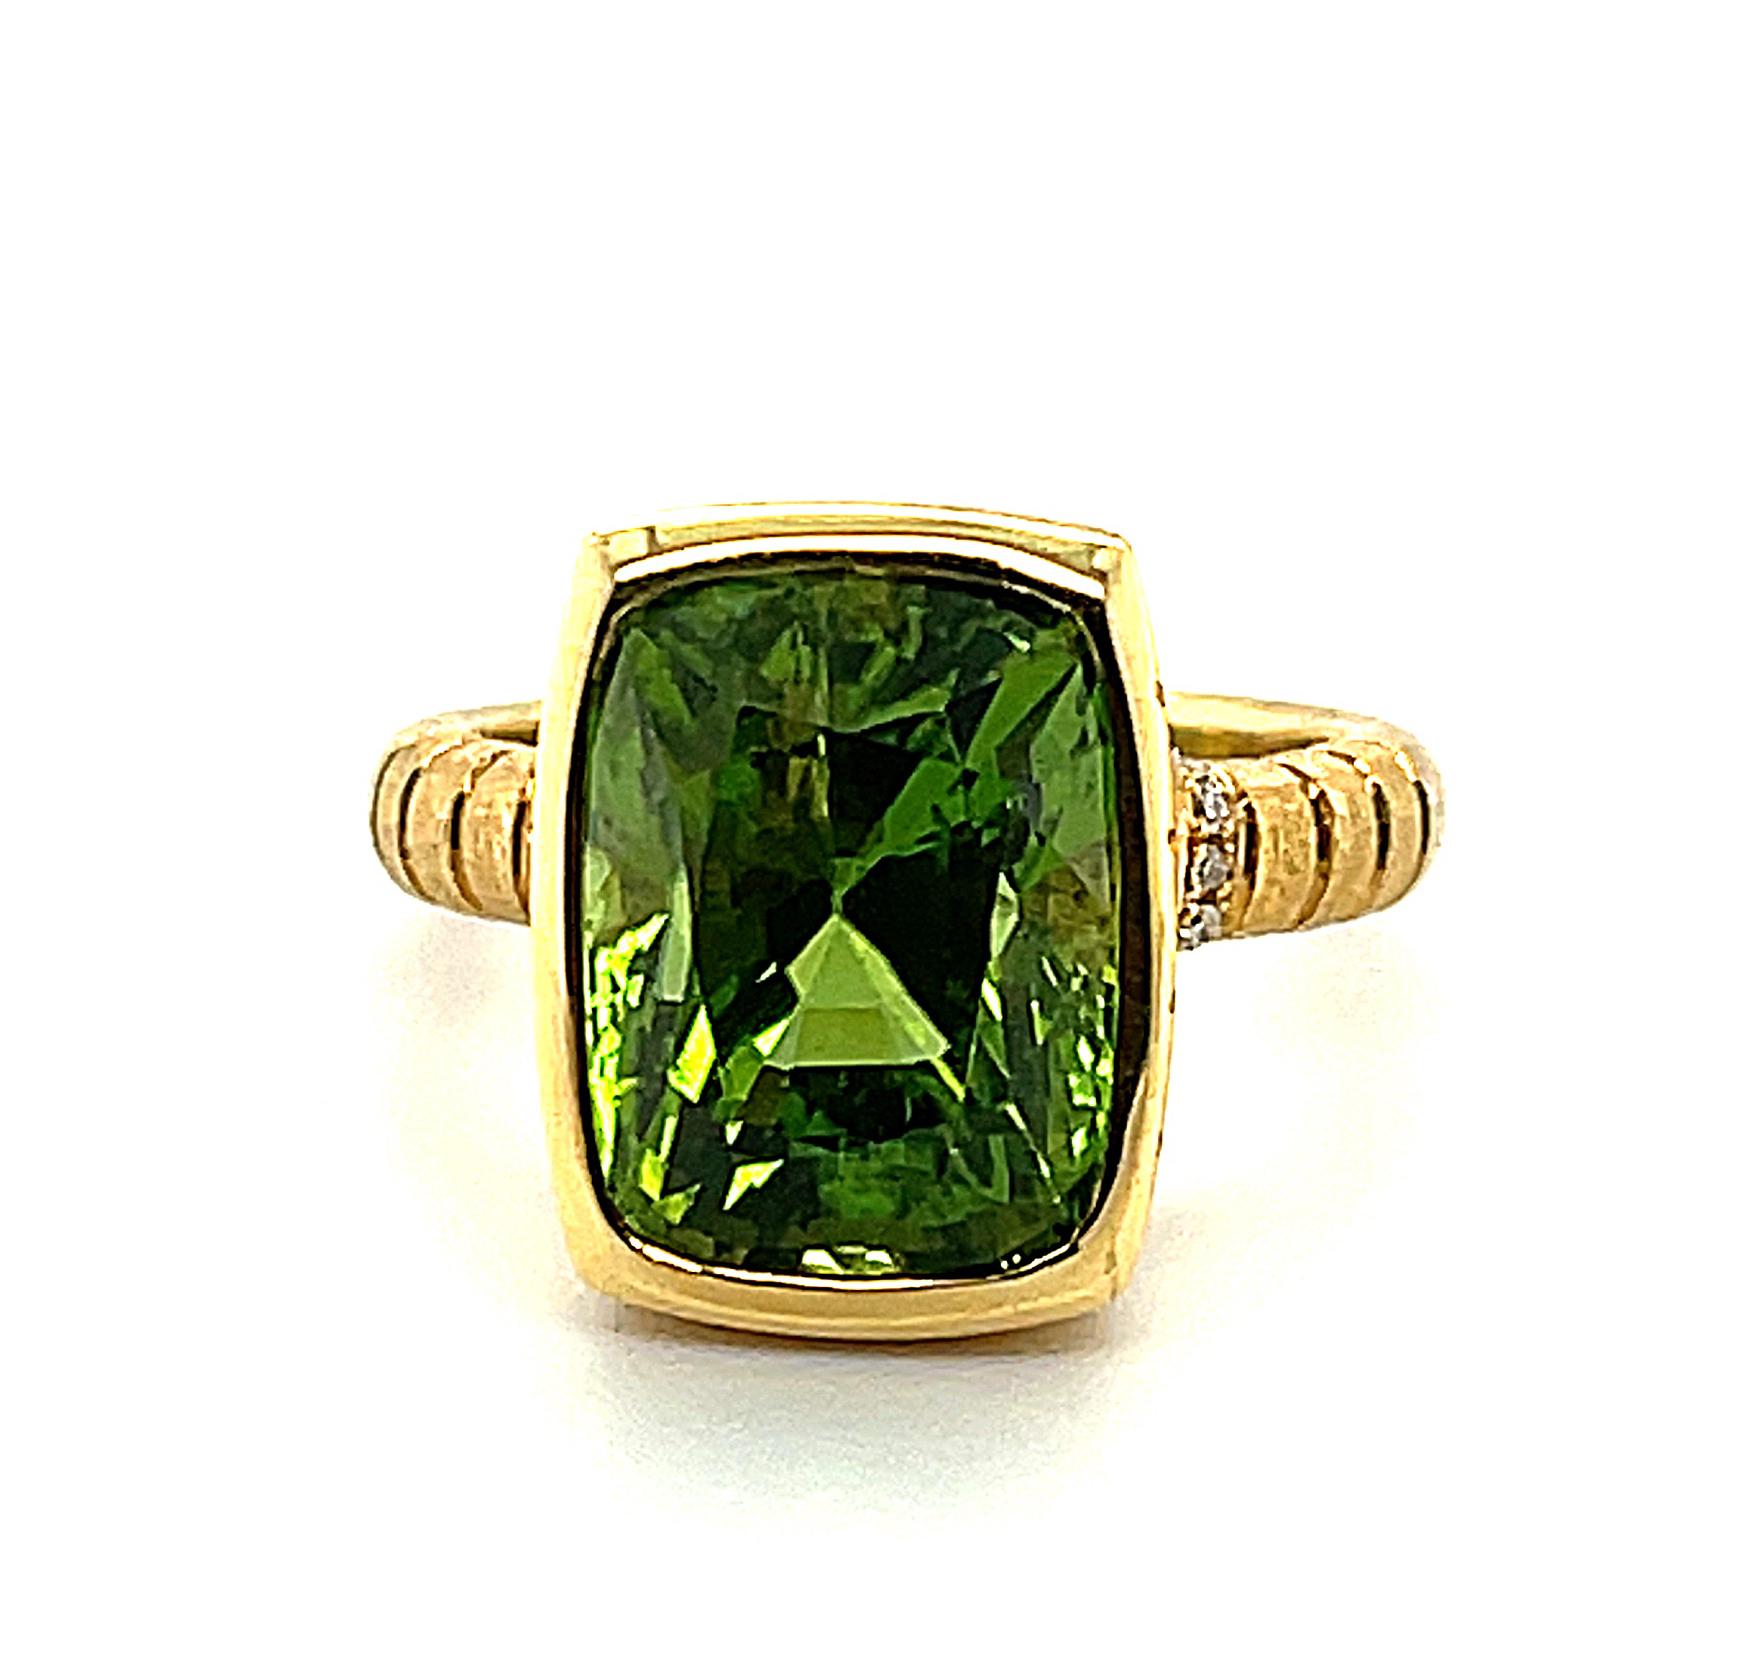 This sleekly stylized ring features a gorgeous 8.88 carat cushion-cut peridot set in precious 18k yellow gold, accented with 10 round brilliant cut diamonds! This is one of our handcrafted signature designs that combines the intrinsic beauty of